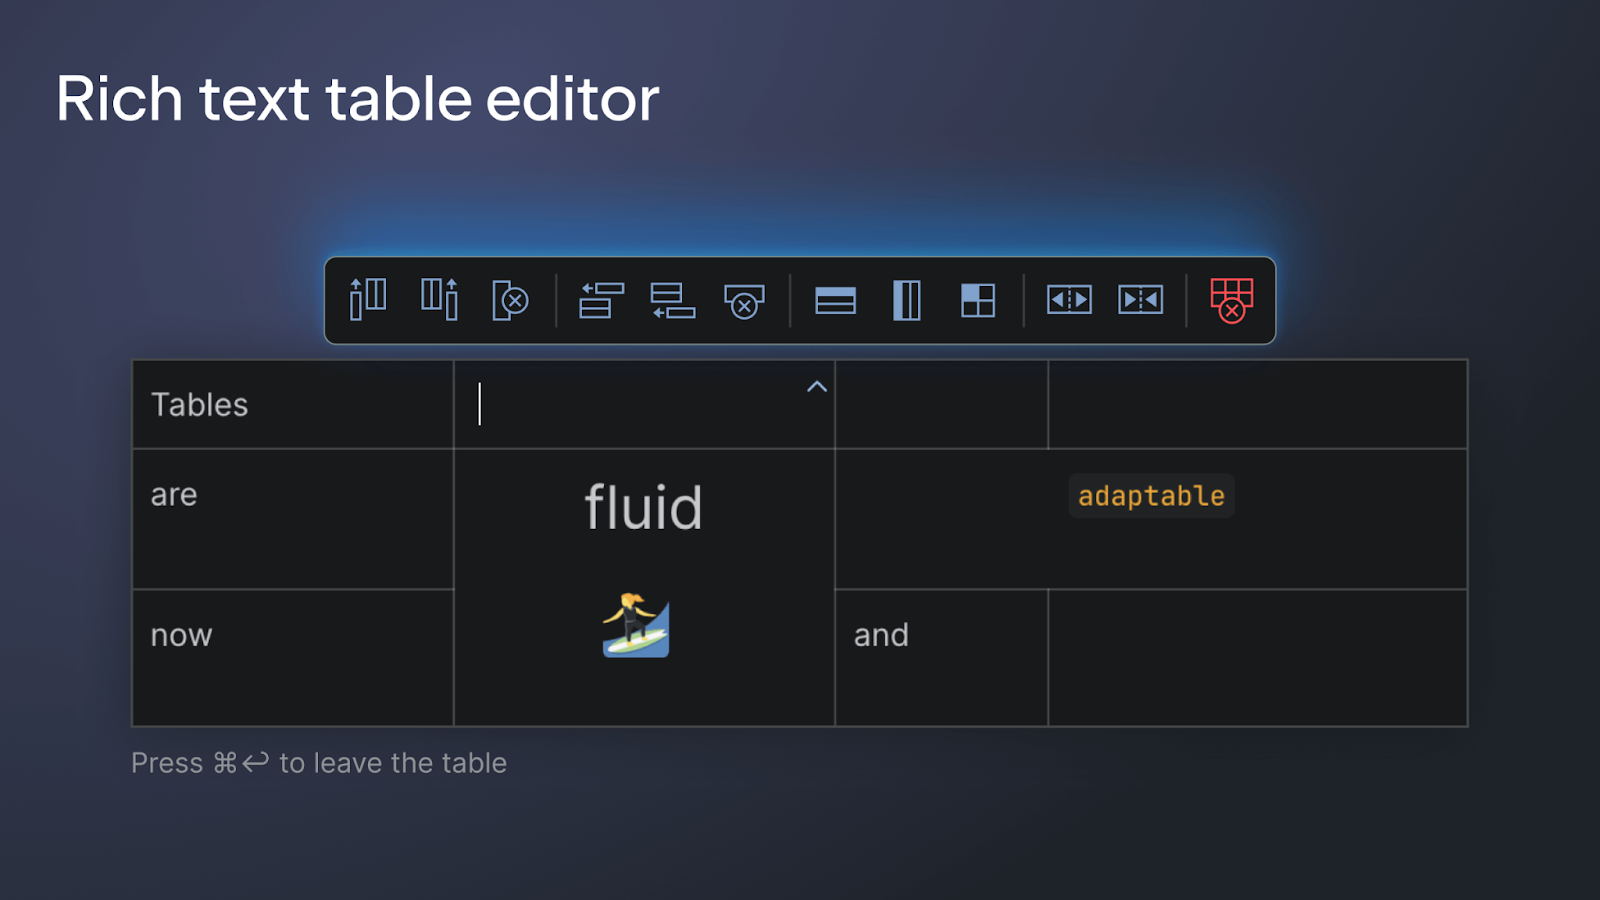 Space rich text table editor